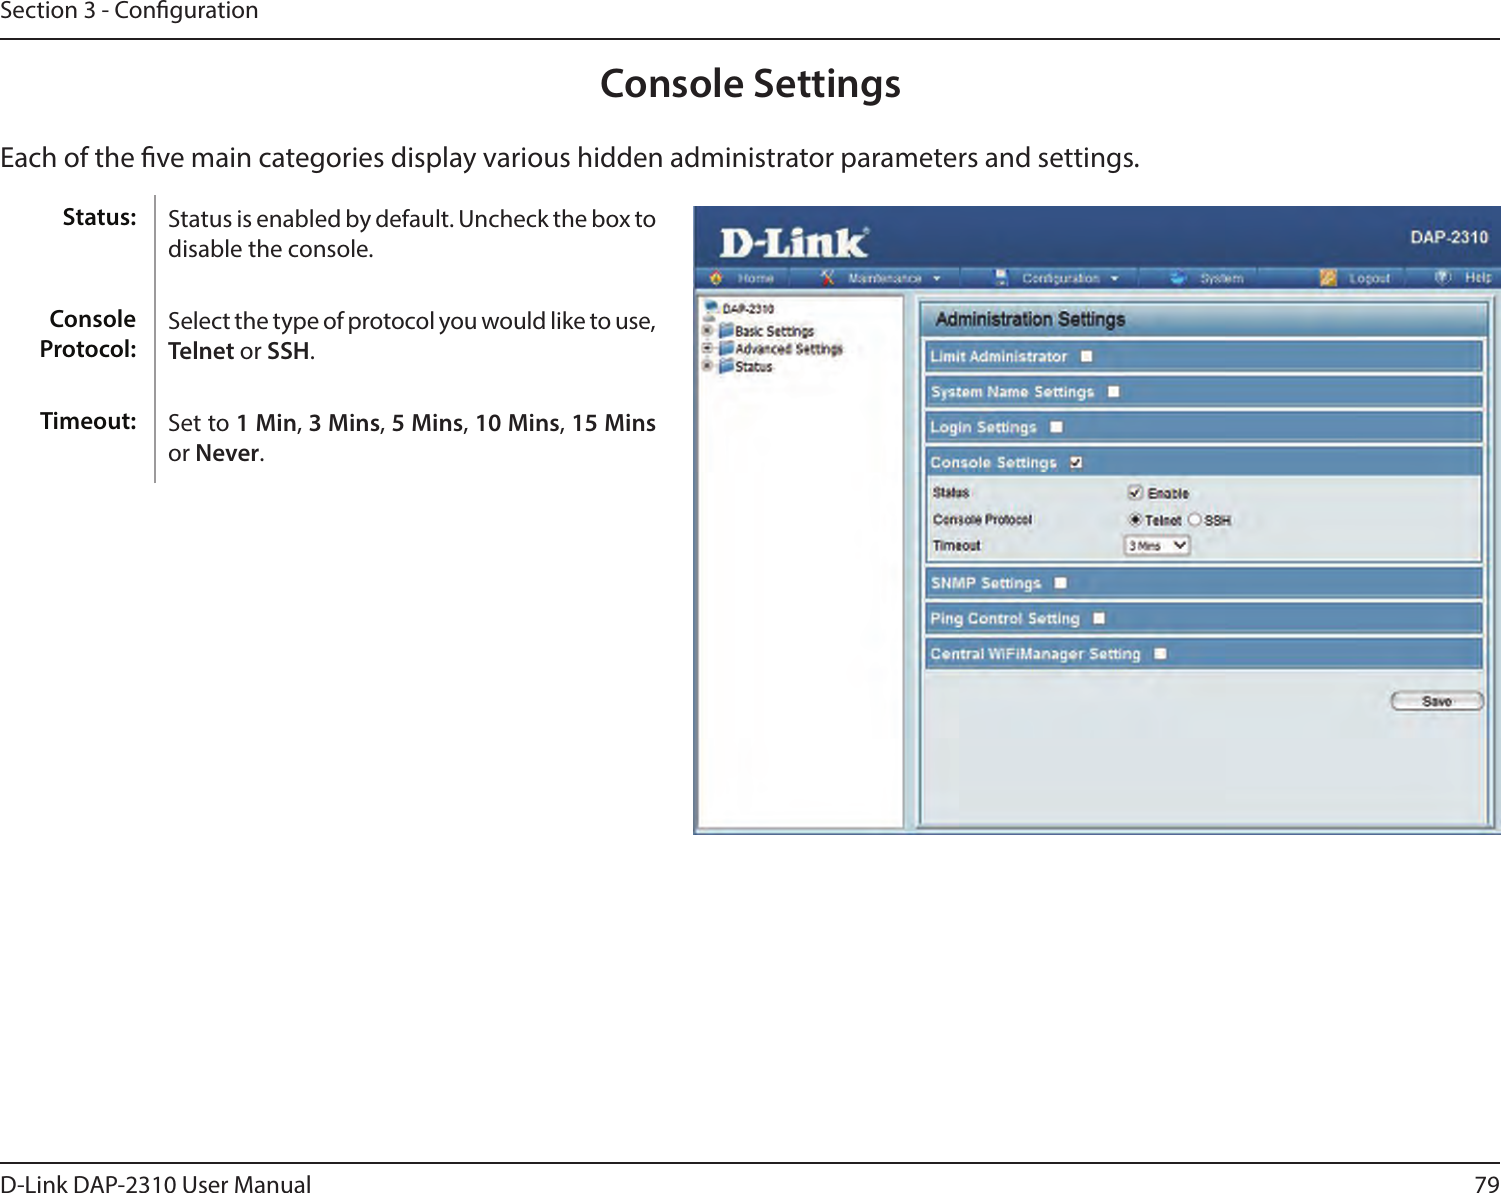 79D-Link DAP-2310 User ManualSection 3 - CongurationConsole SettingsEach of the ve main categories display various hidden administrator parameters and settings.Status is enabled by default. Uncheck the box to disable the console.Select the type of protocol you would like to use, Telnet or SSH.Set to 1 Min, 3 Mins, 5 Mins, 10 Mins, 15 Mins or Never.Status:Console Protocol:Timeout: